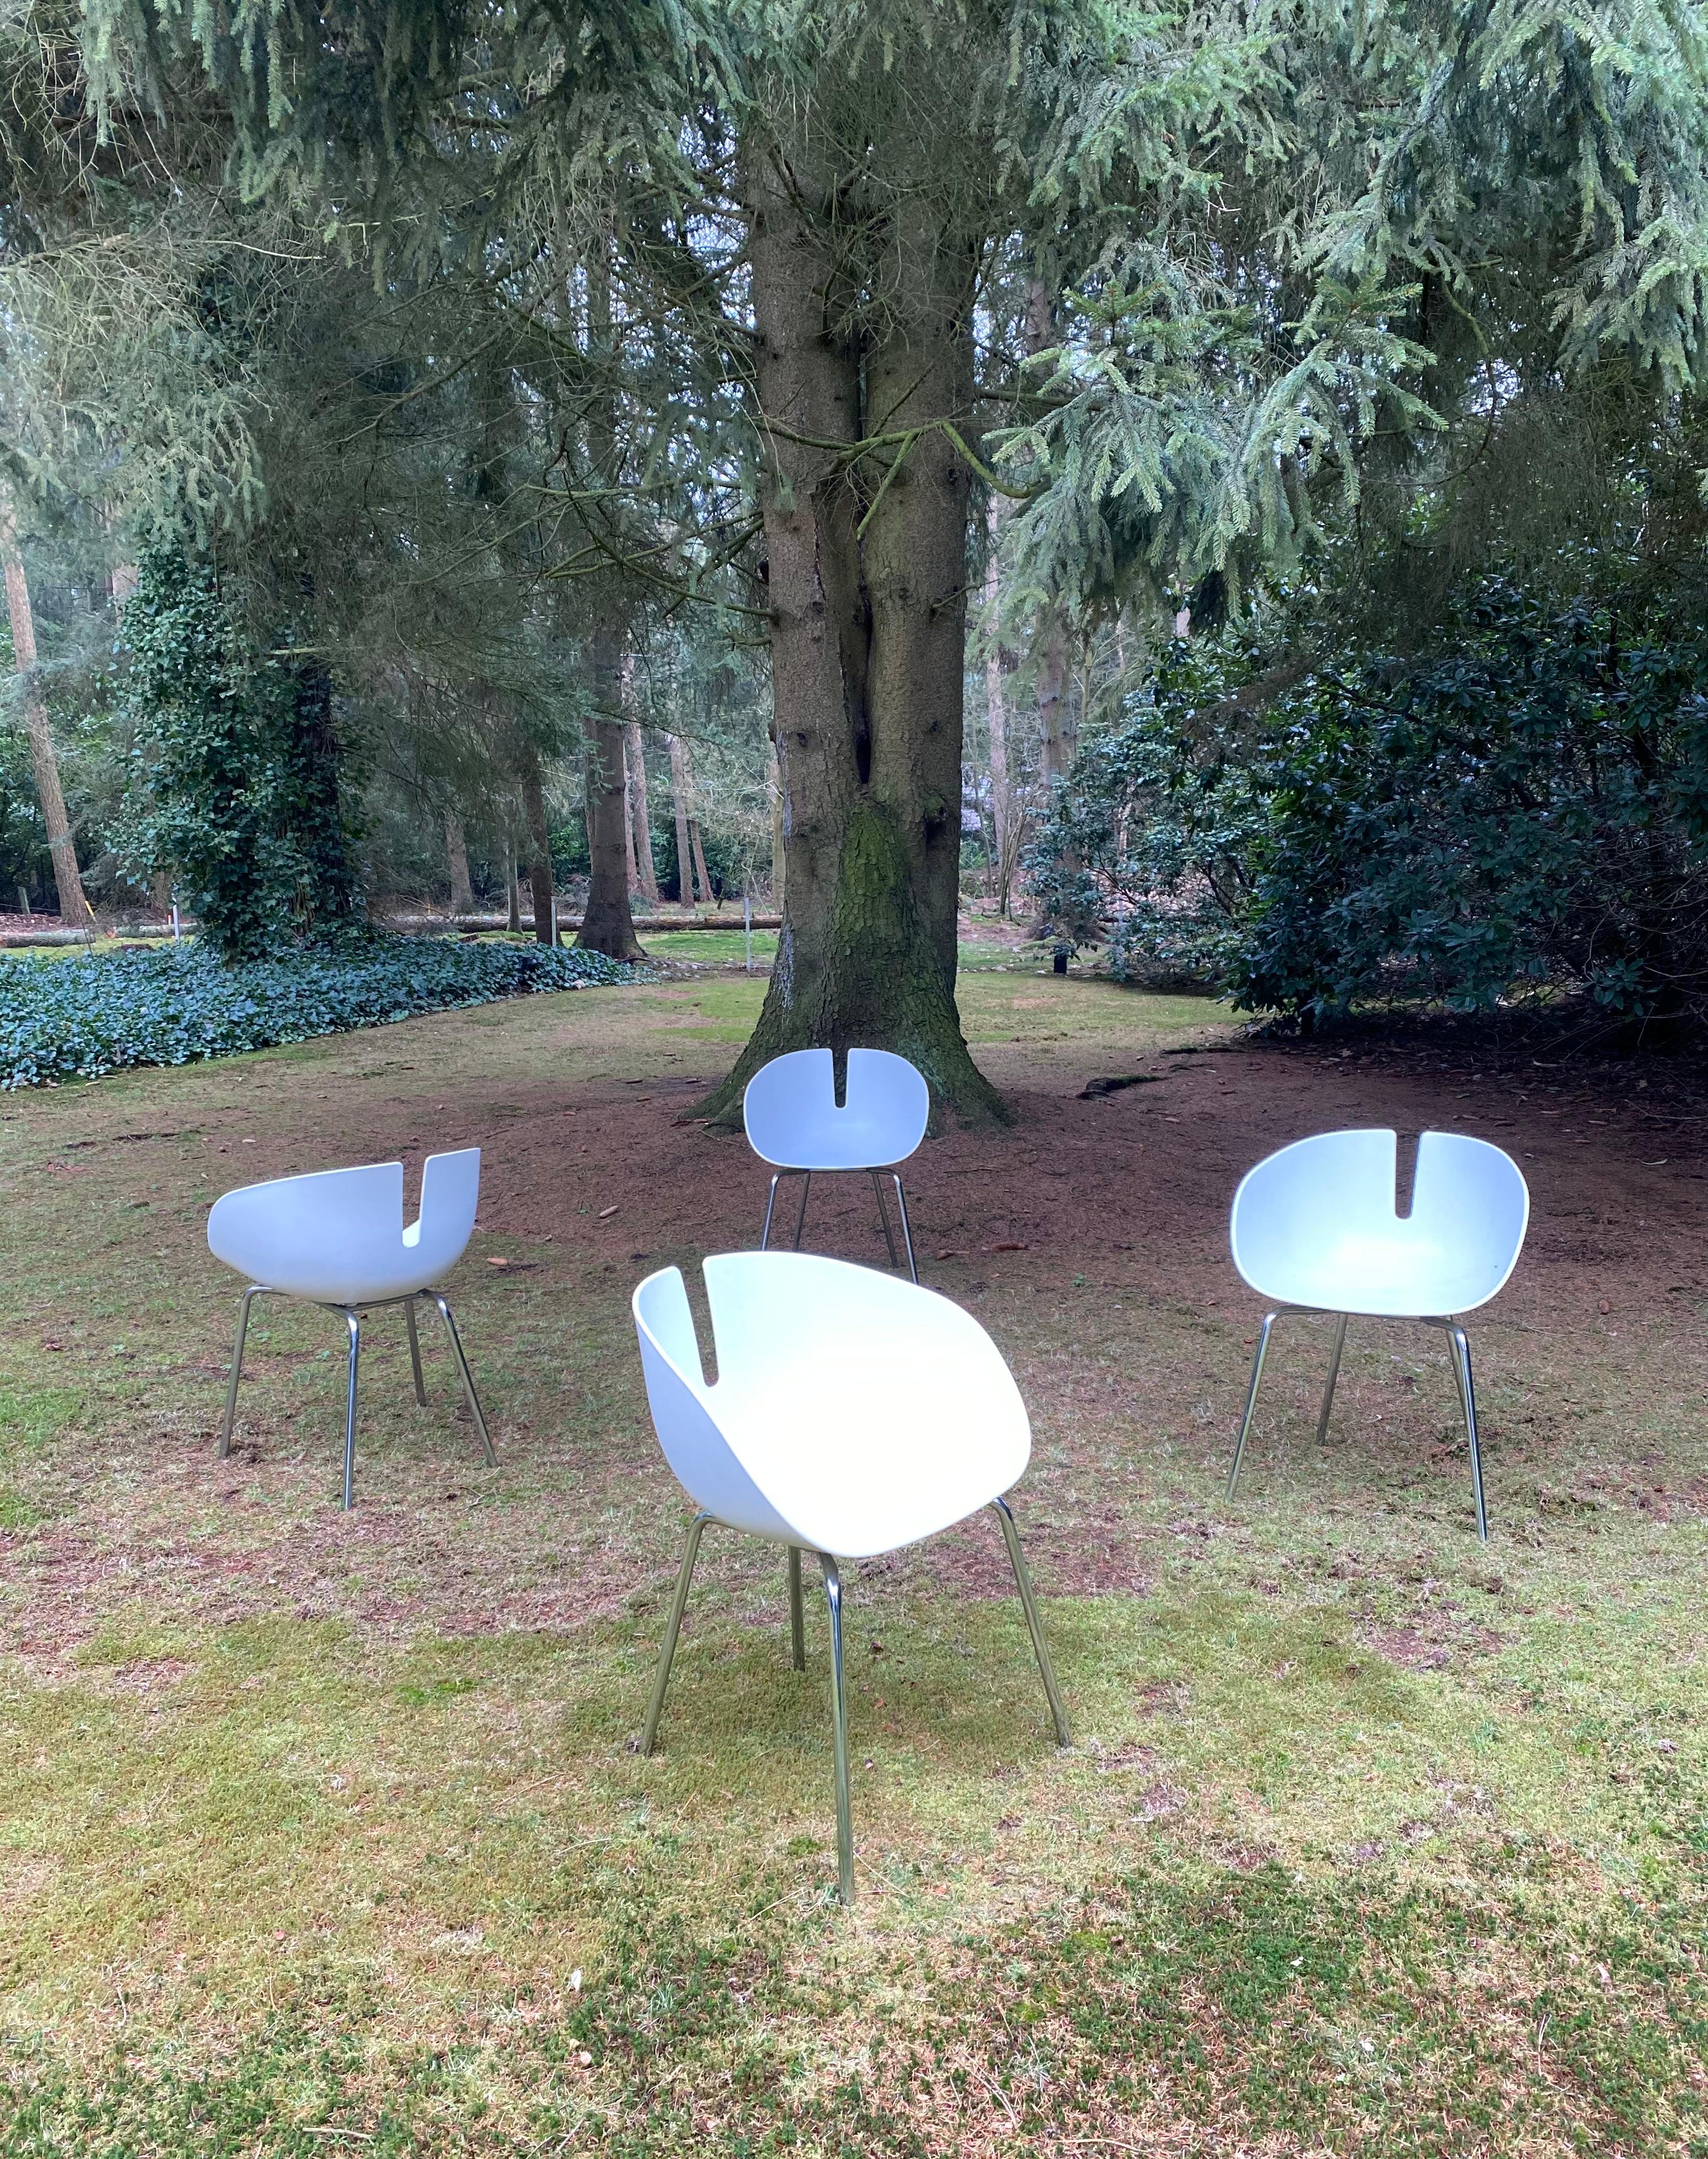 Italian Set of Four White Moroso Chairs, Model Fjord, by Patricia Urquiola 2002 For Sale